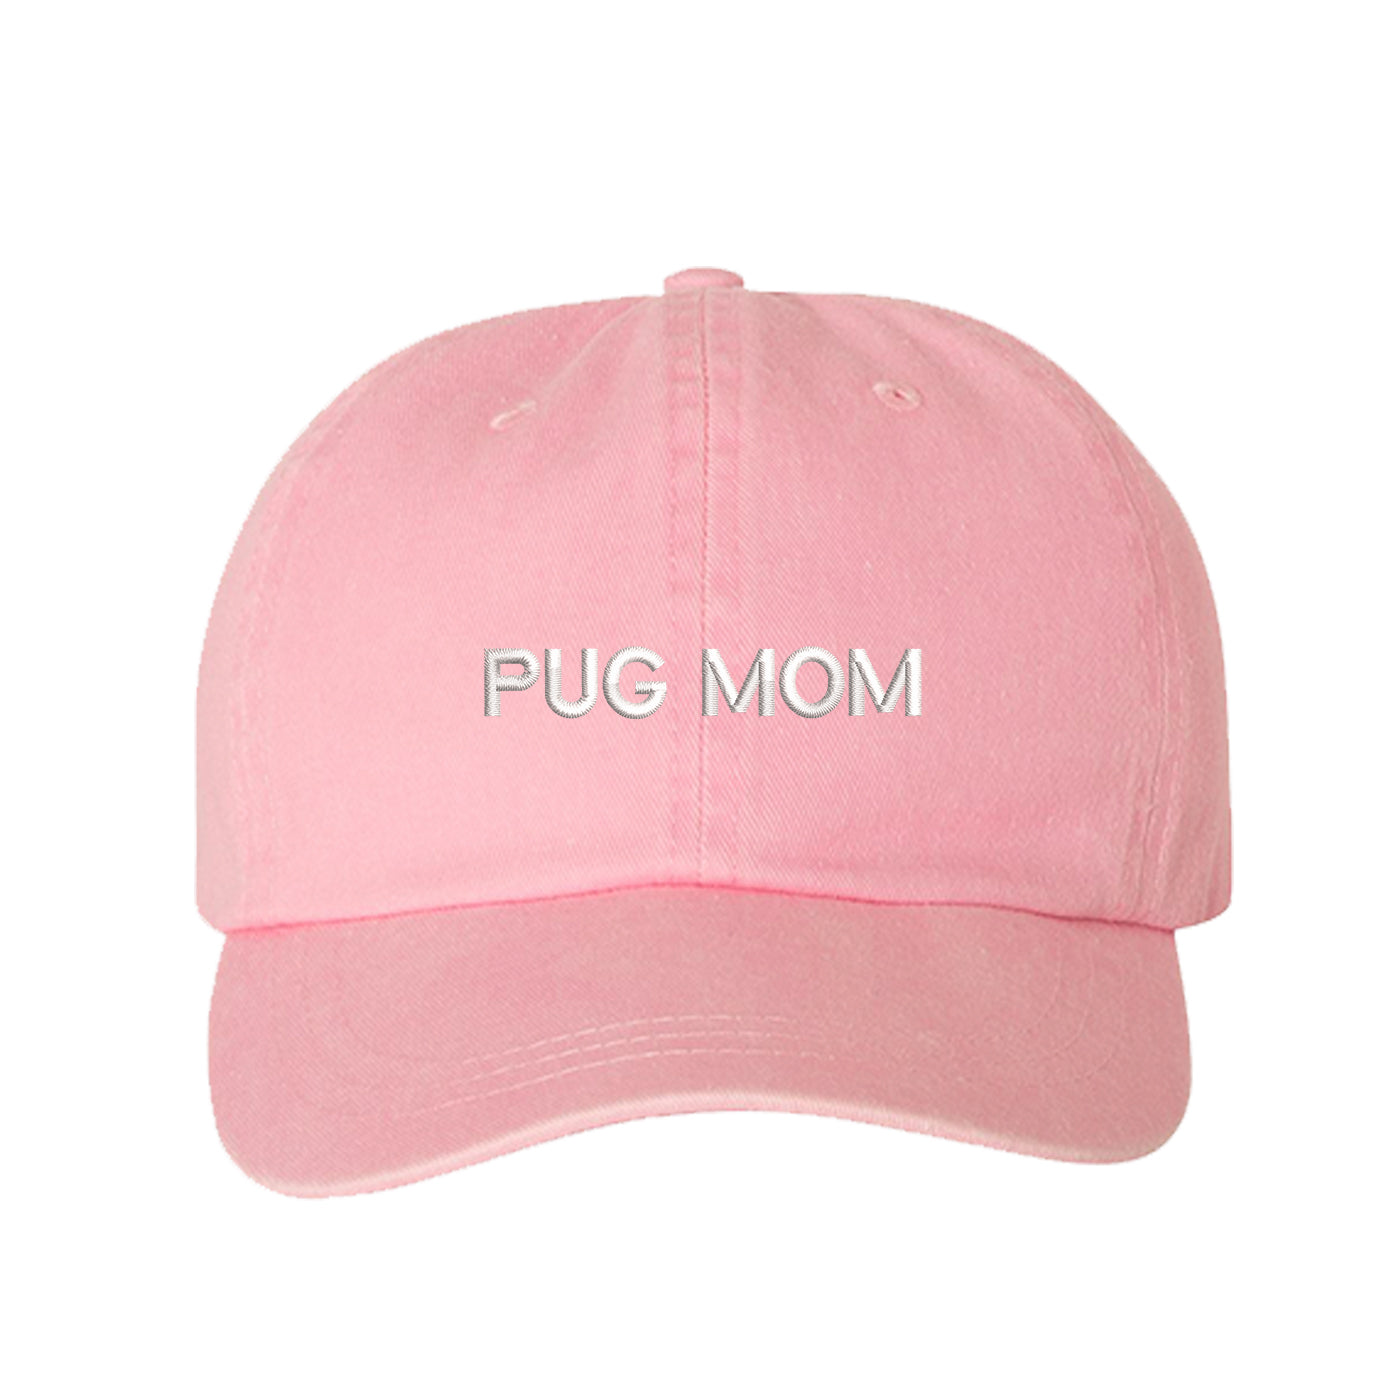 Pug Mom Washed Baseball Hat, Pug Mom Dad Hat, Dog Parent Hats, Embroidered Dad hat, Animal Lover Gifts, Pug Mother, Mothers Day Gift, Pug Mama, DSY Lifestyle Dad Hats, Light Pink Washed Baseball Hat